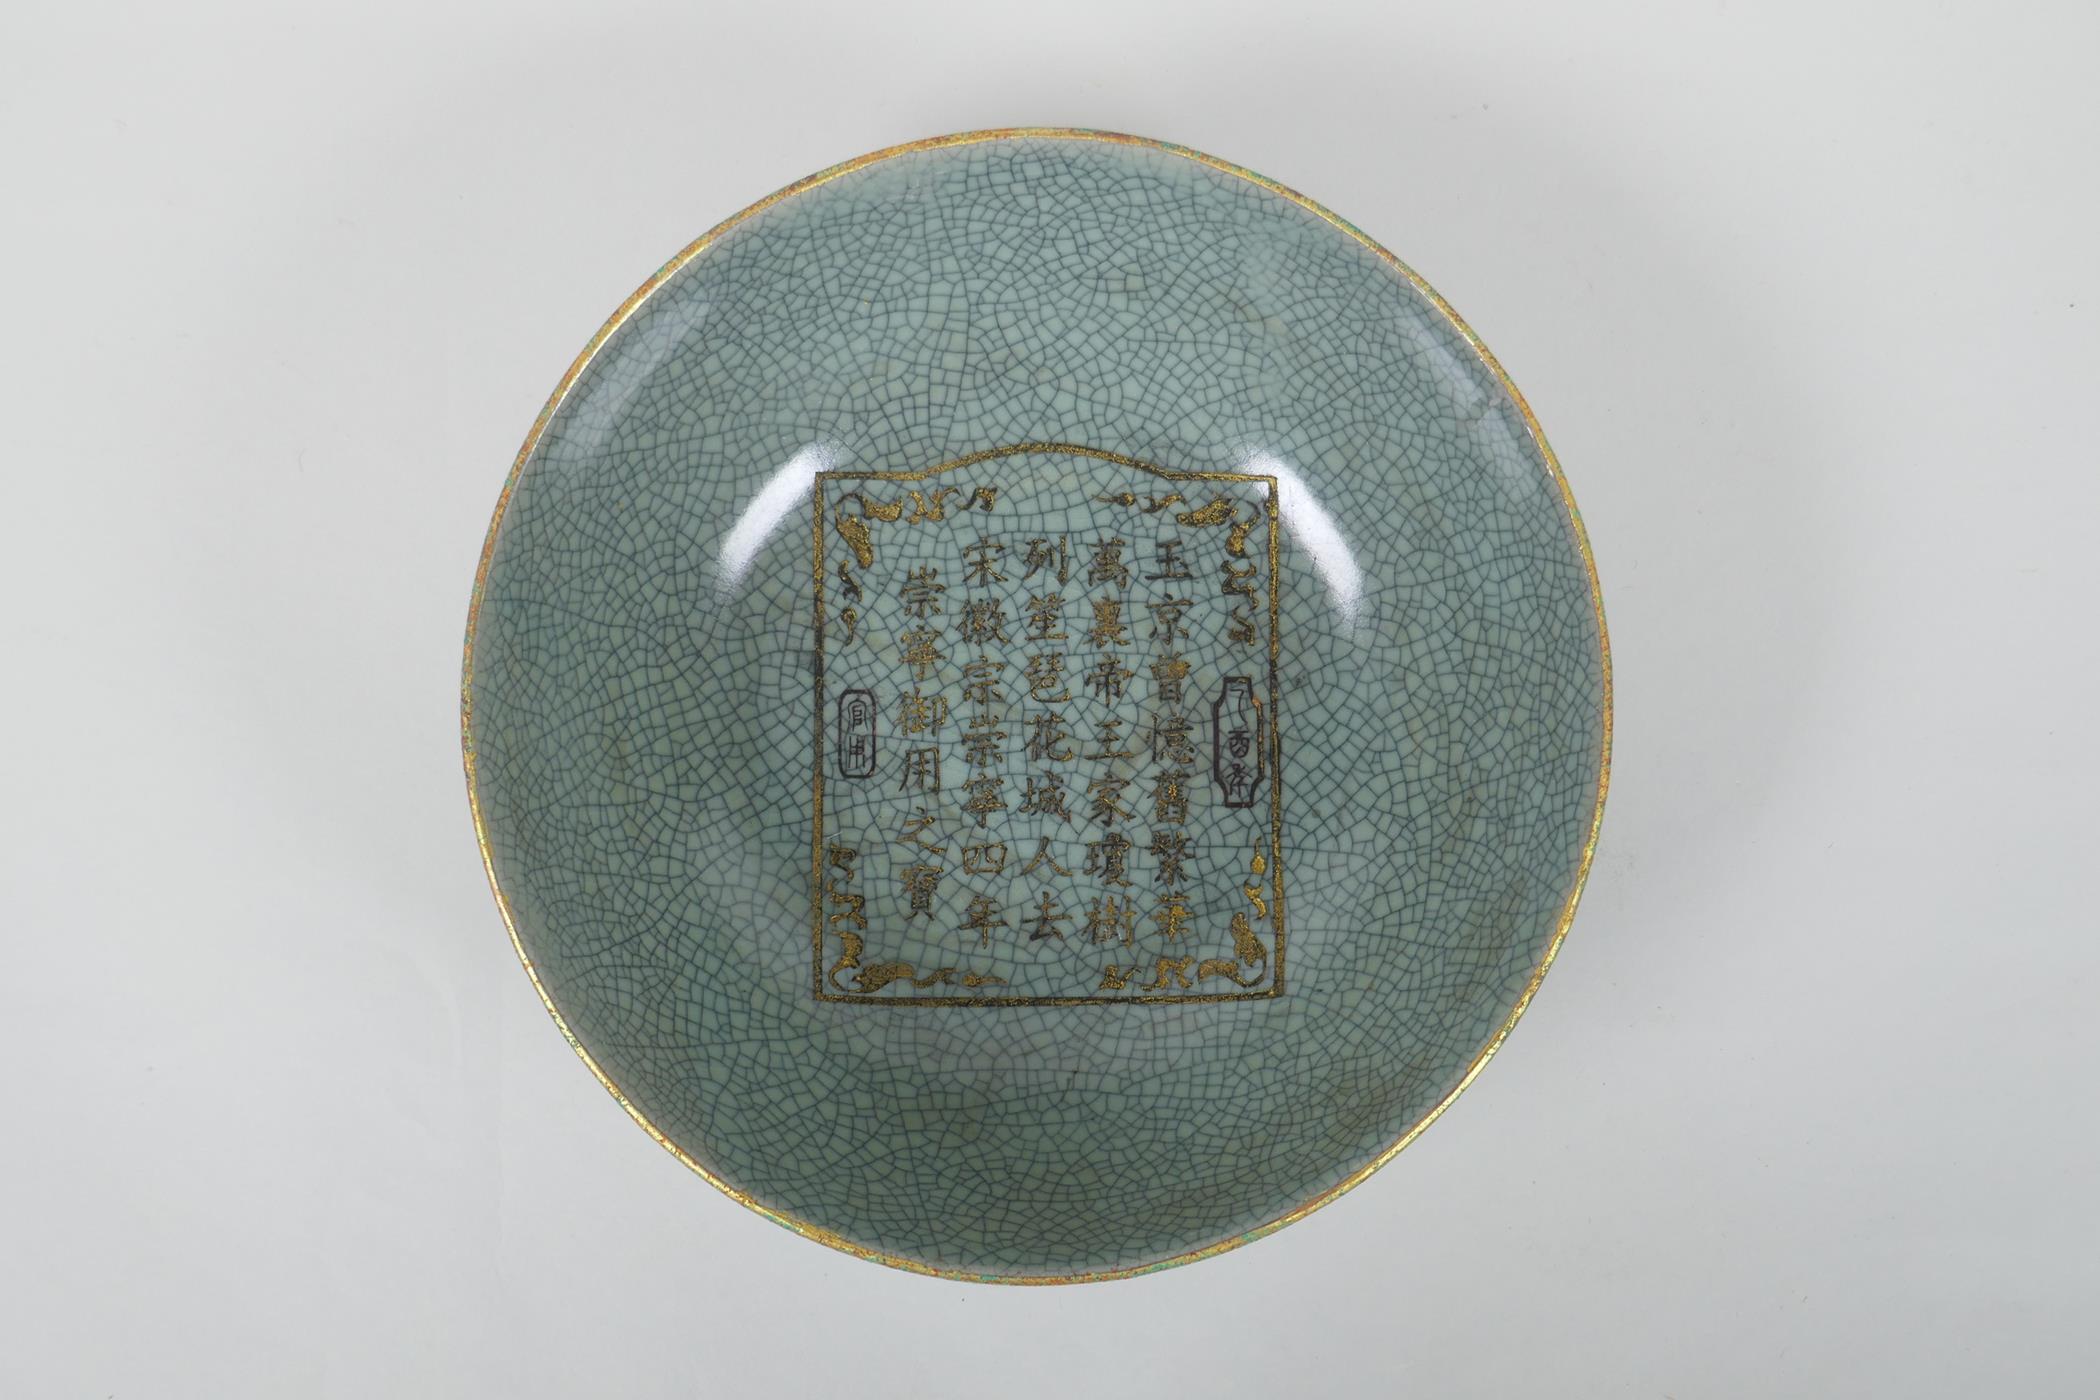 A Chinese celadon crackle glazed porcelain bowl with a gilt metal rim and decorated with chased